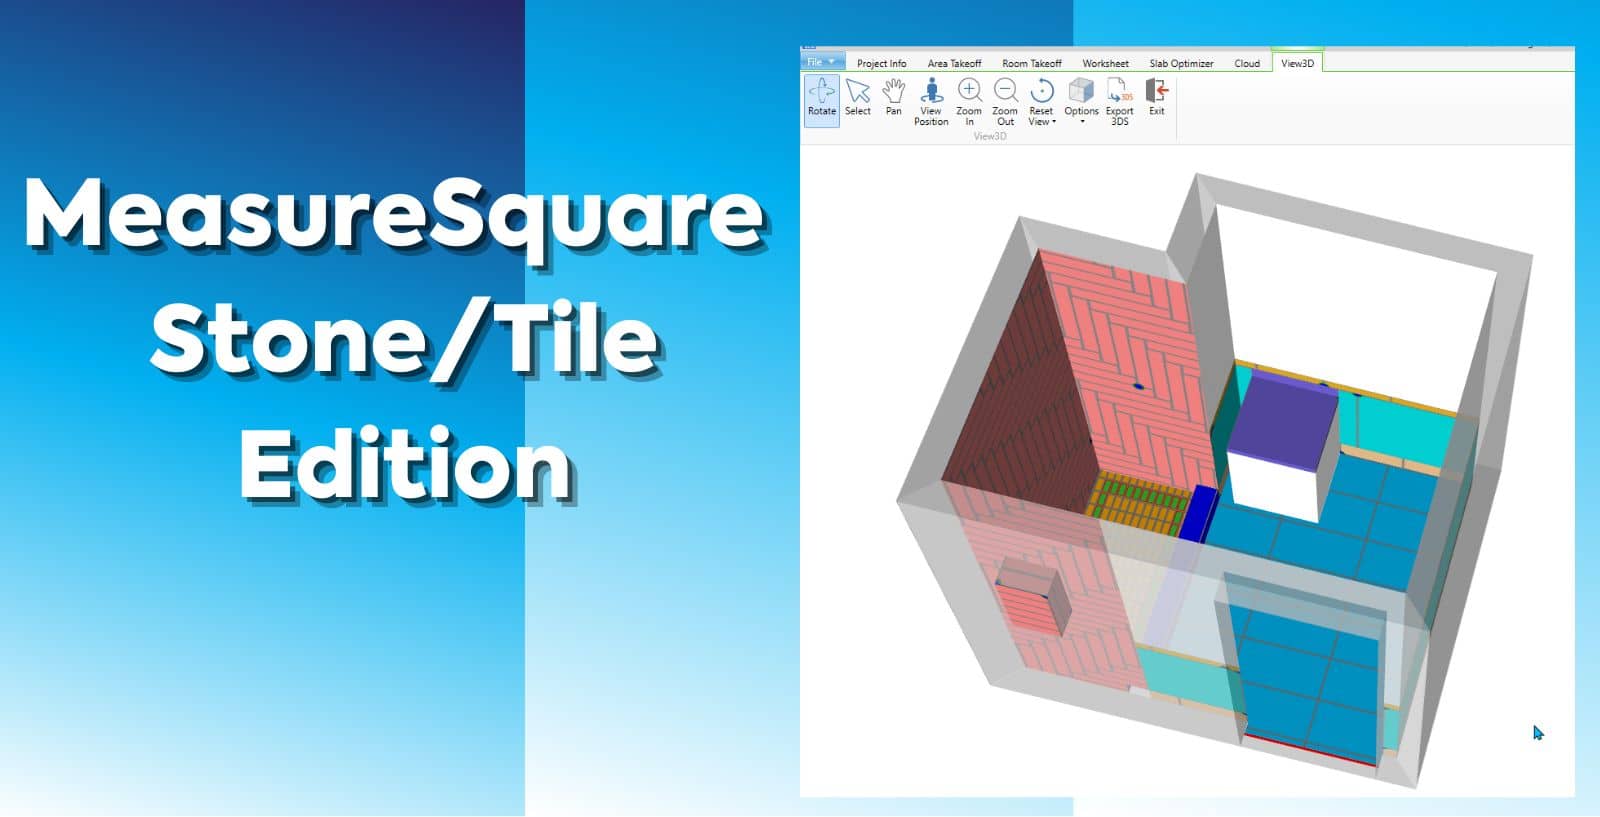 PRESS RELEASE – Measure Square Corp. Unveils MeasureSquare Stone/Tile, the Comprehensive Takeoff, Design, and Estimating Software for Stone/Tile Industry Professionals to Bid on Commercial Projects at Coverings 2023